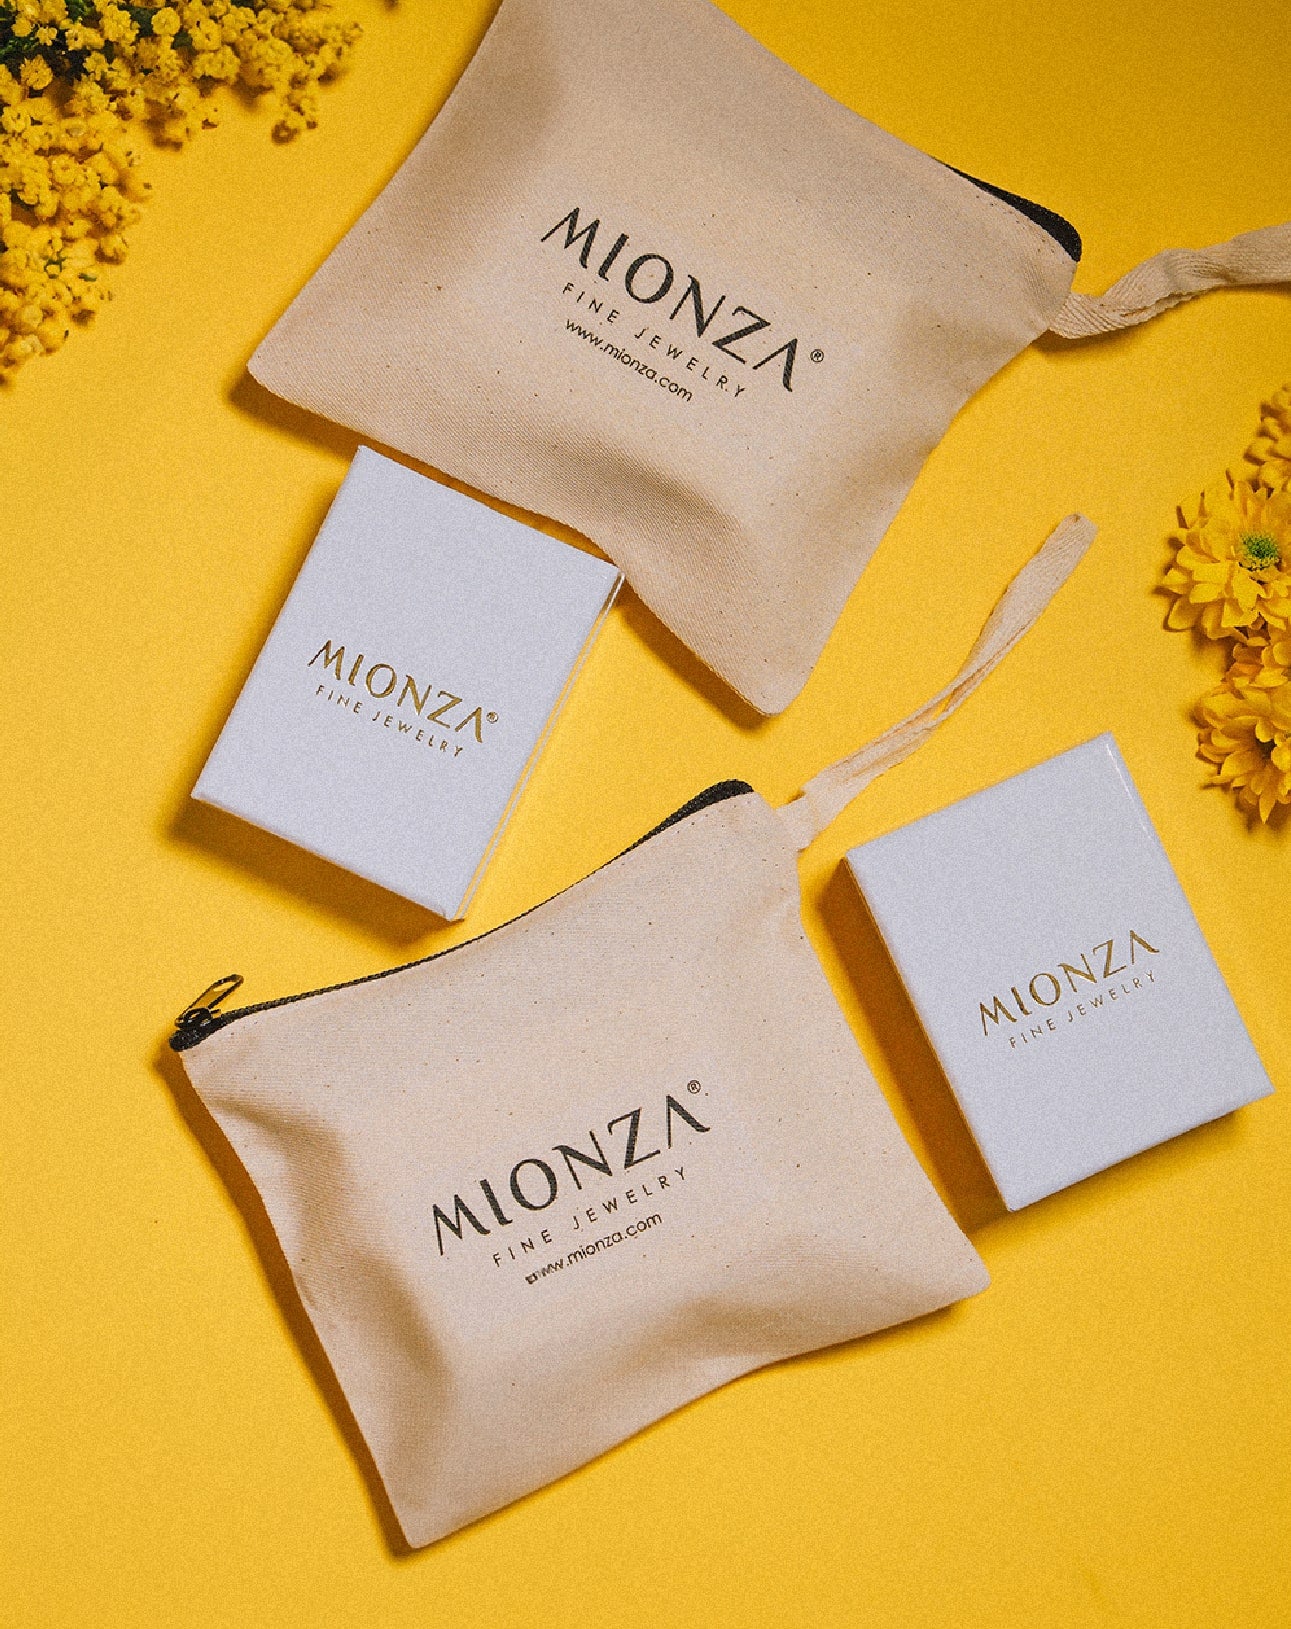 mionza-gift-boxes